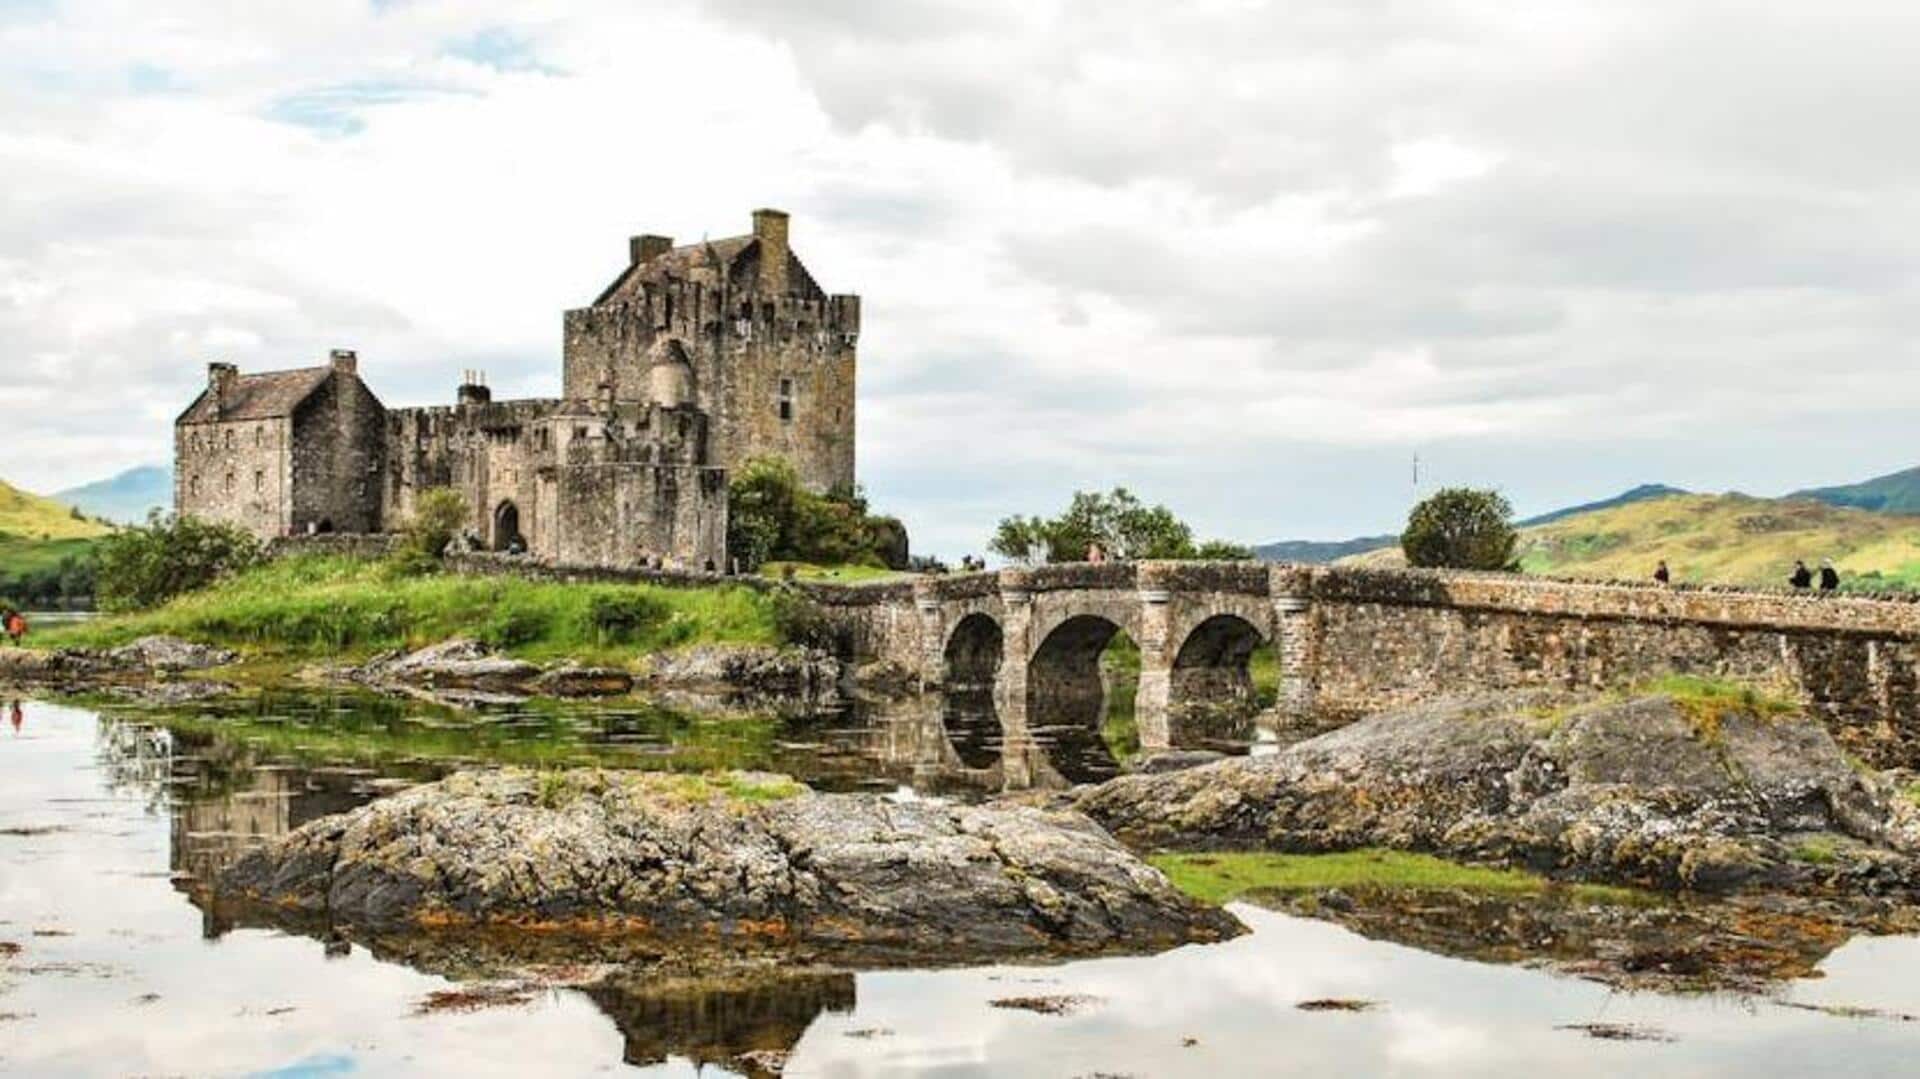 Experiencing Scotland's tapestry of castles and Highland splendor